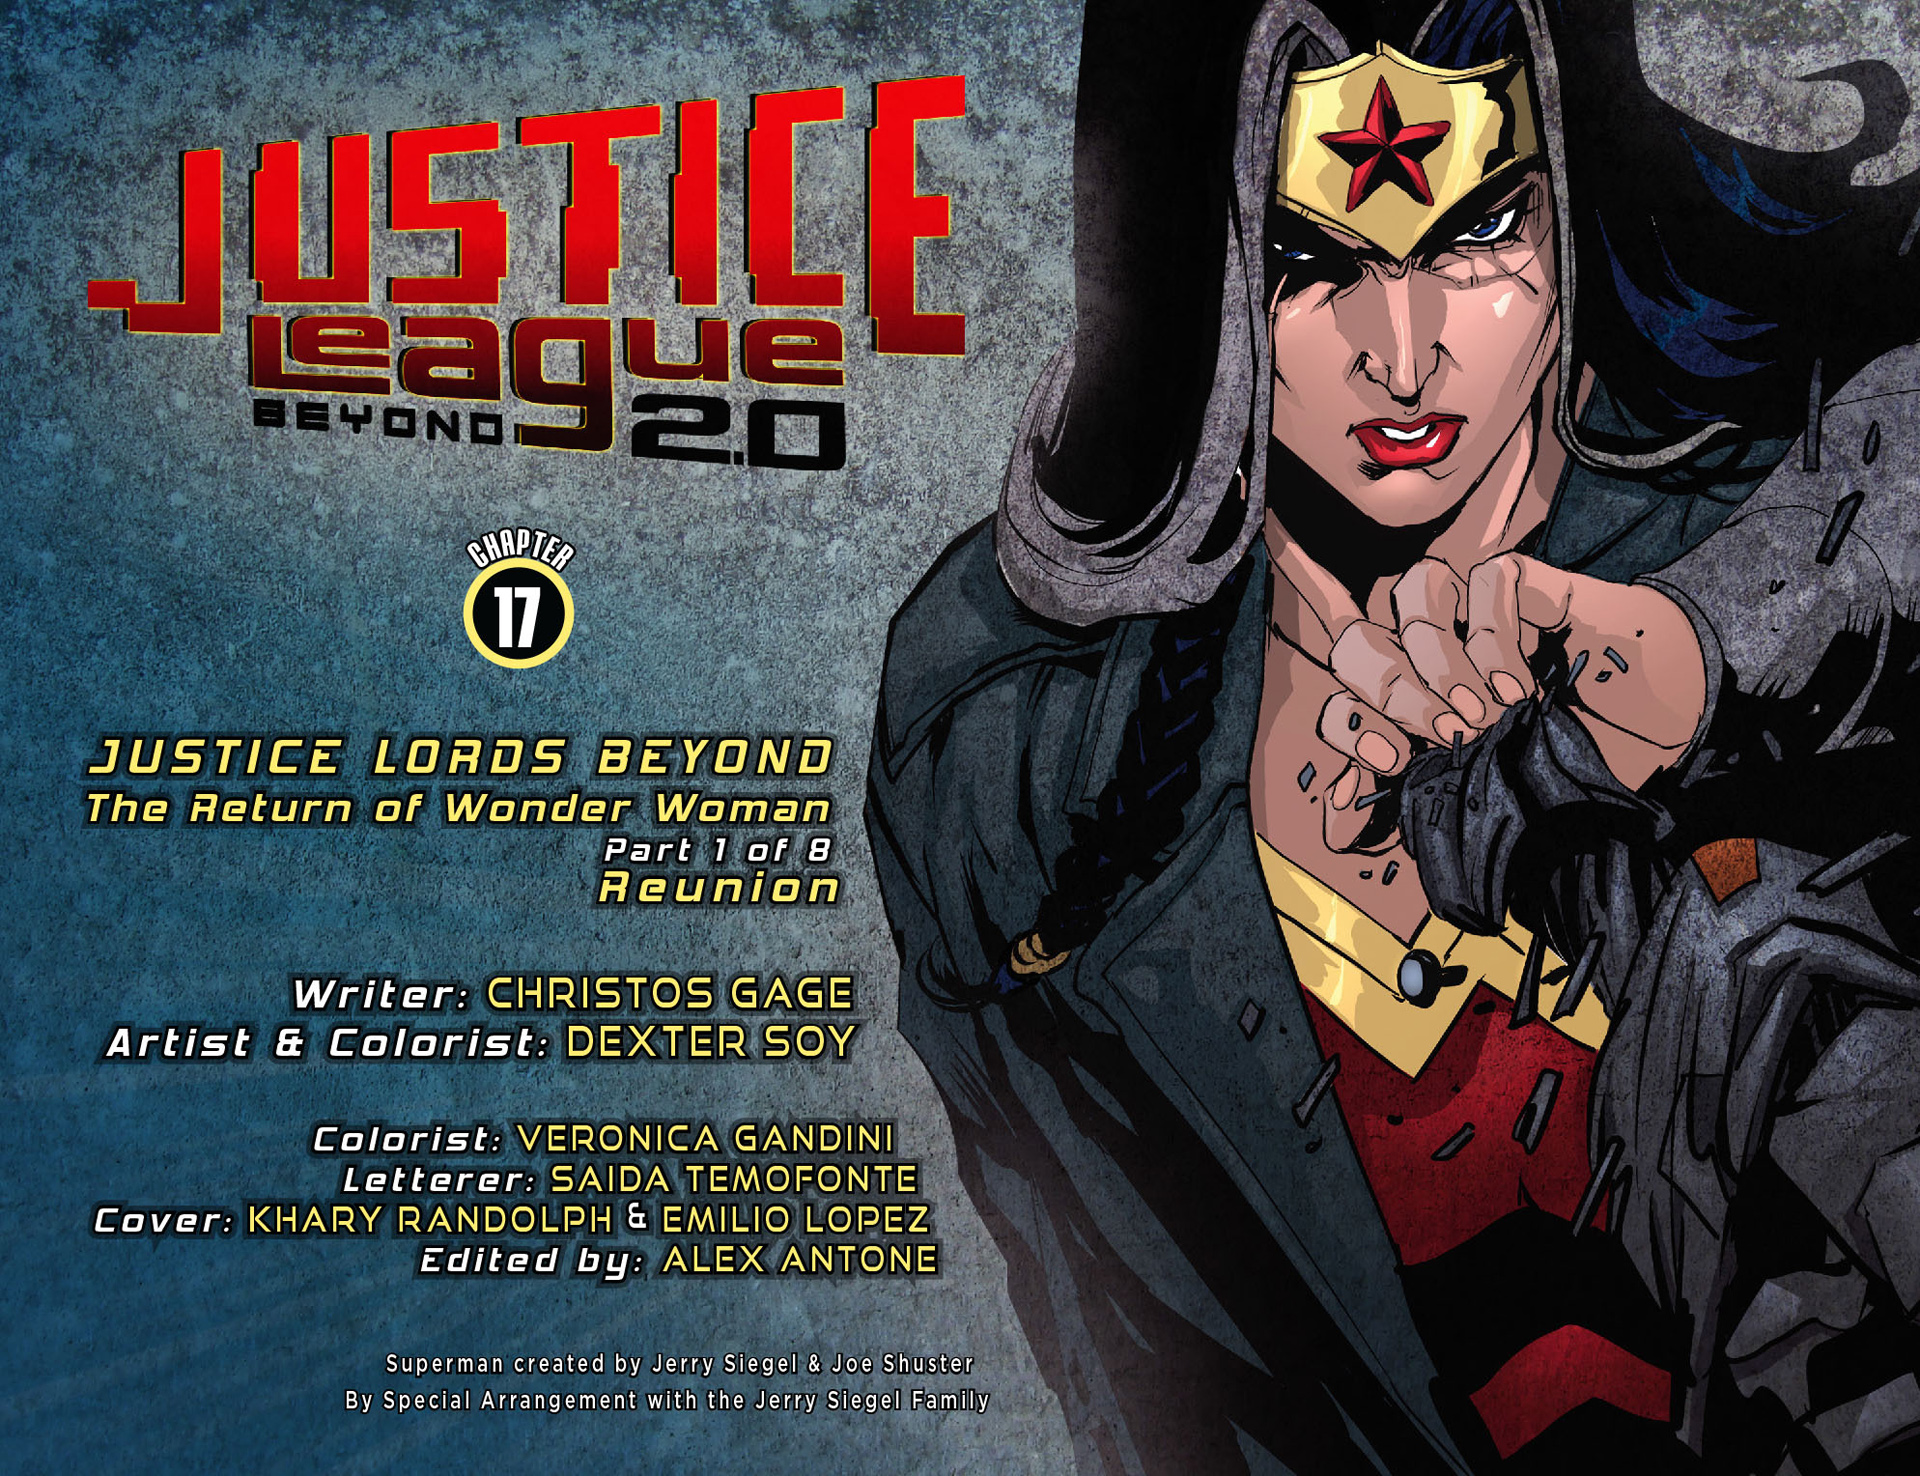 Read online Justice League Beyond 2.0 comic -  Issue #17 - 2